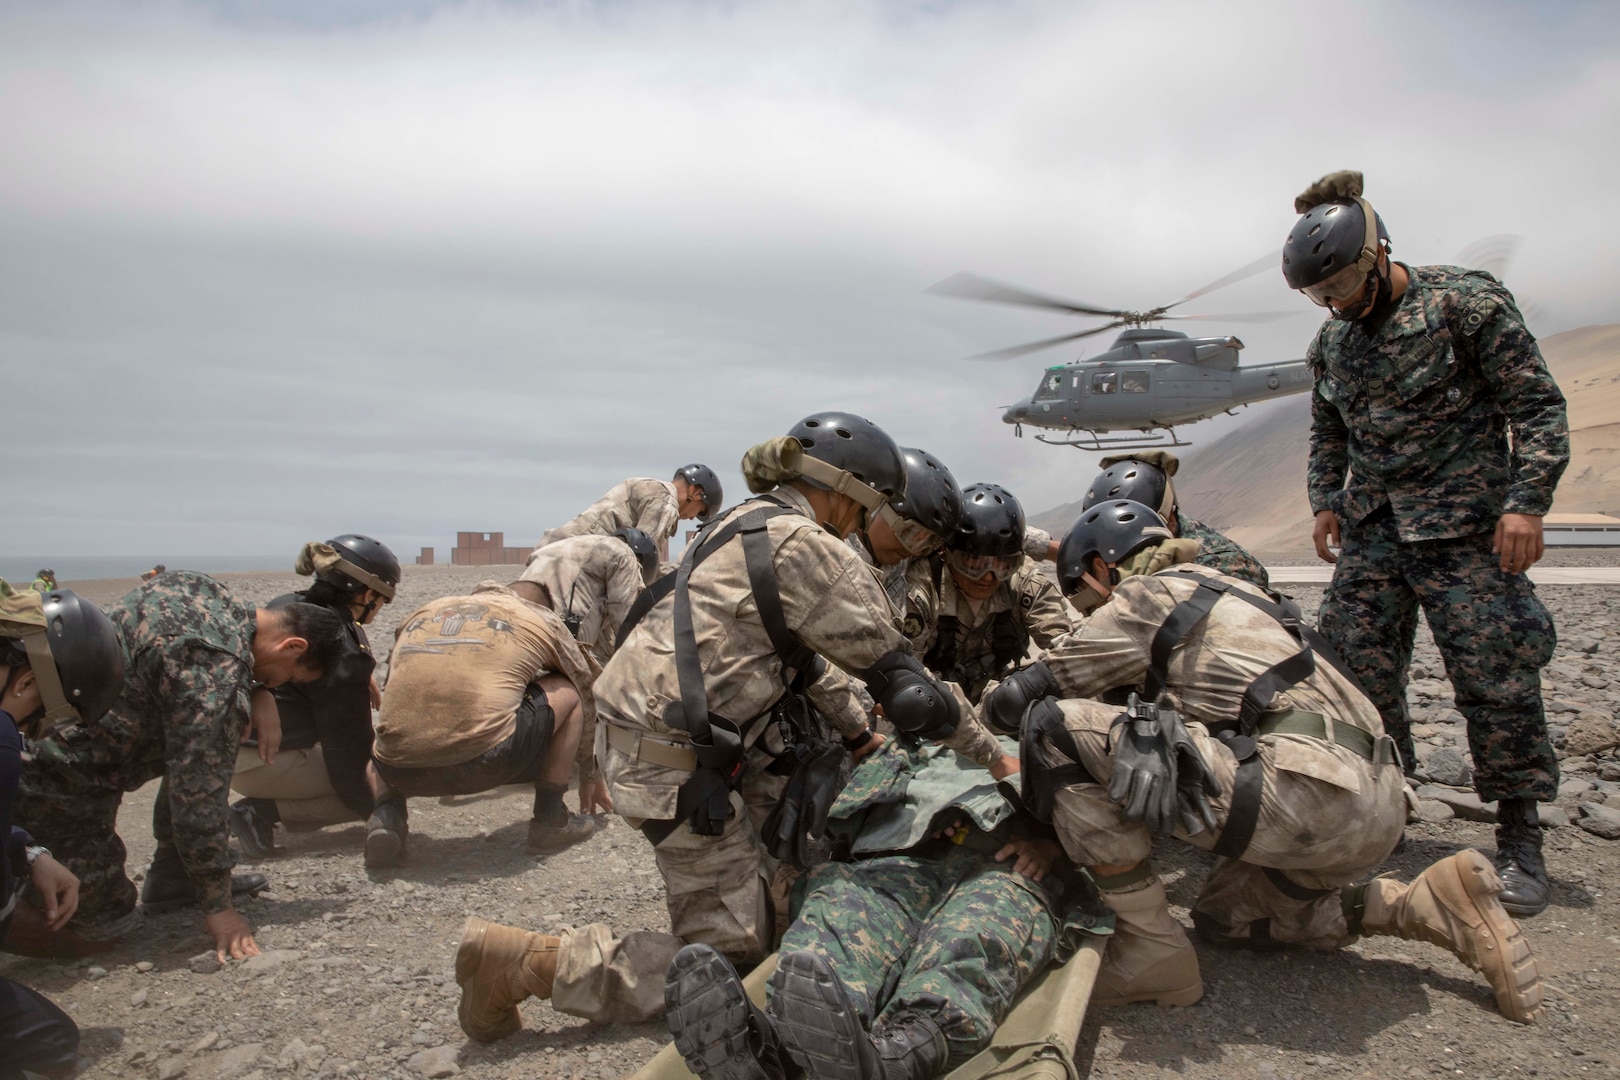 Military personnel practice medical evacuations as a helicopter flies in the background.